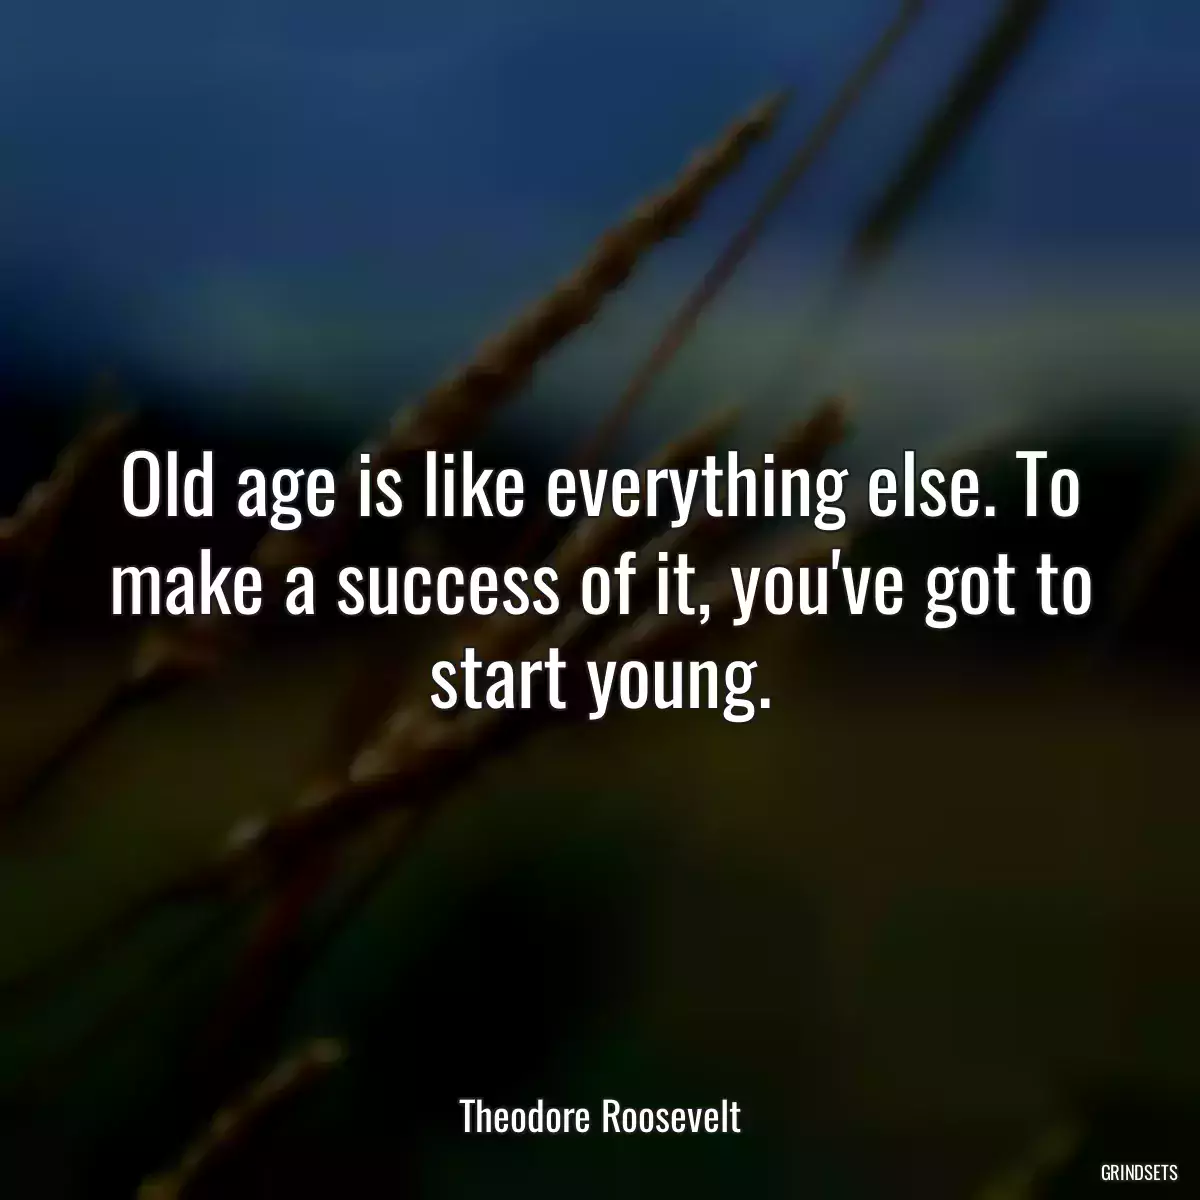 Old age is like everything else. To make a success of it, you\'ve got to start young.